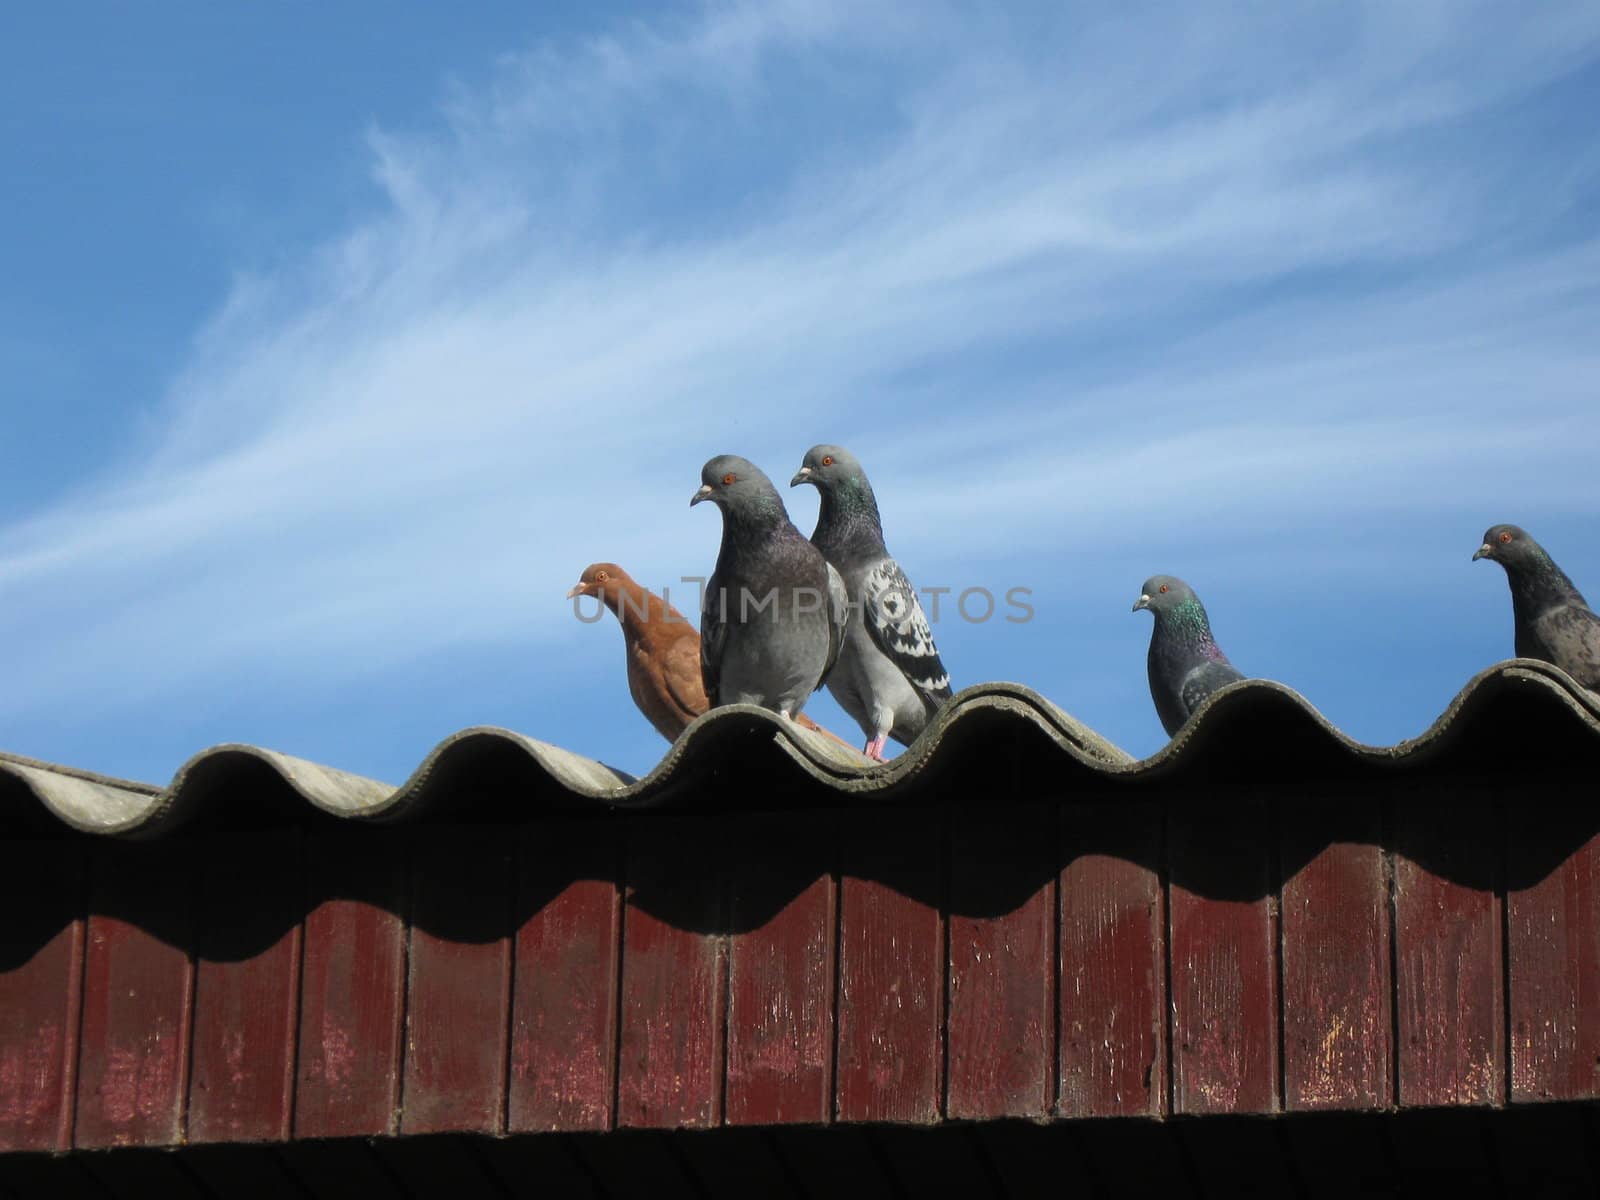  pigeons on roof by Jova